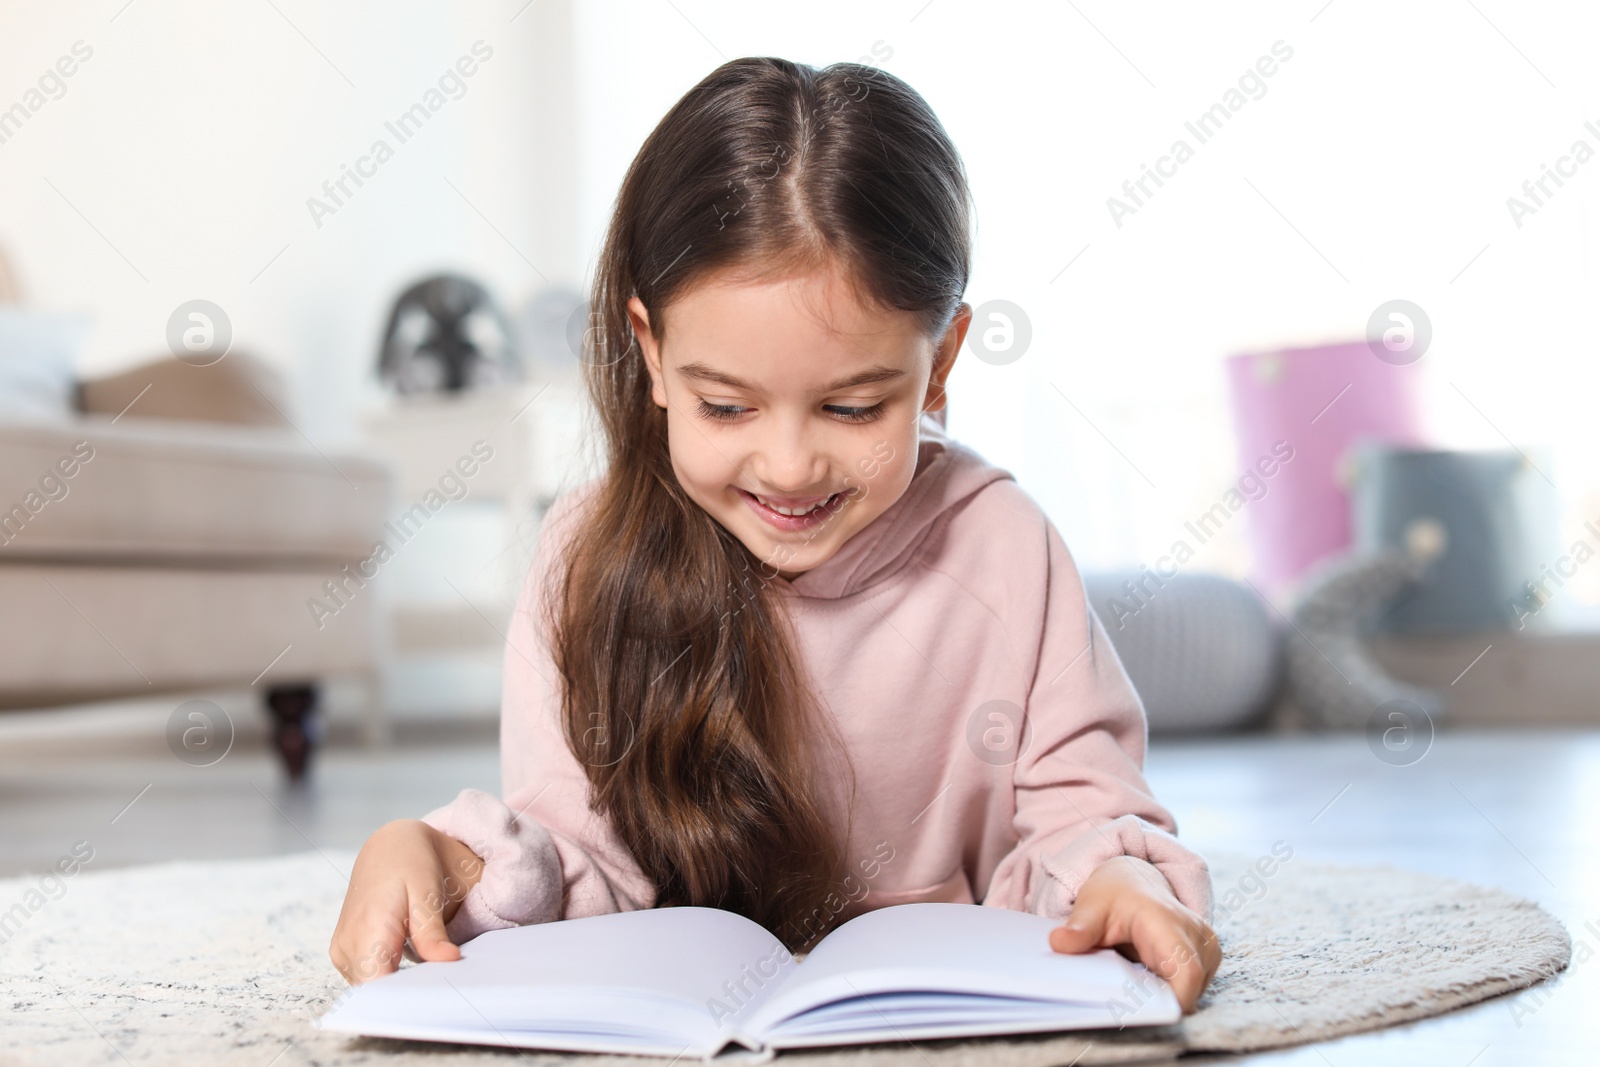 Photo of Cute child reading book on floor indoors